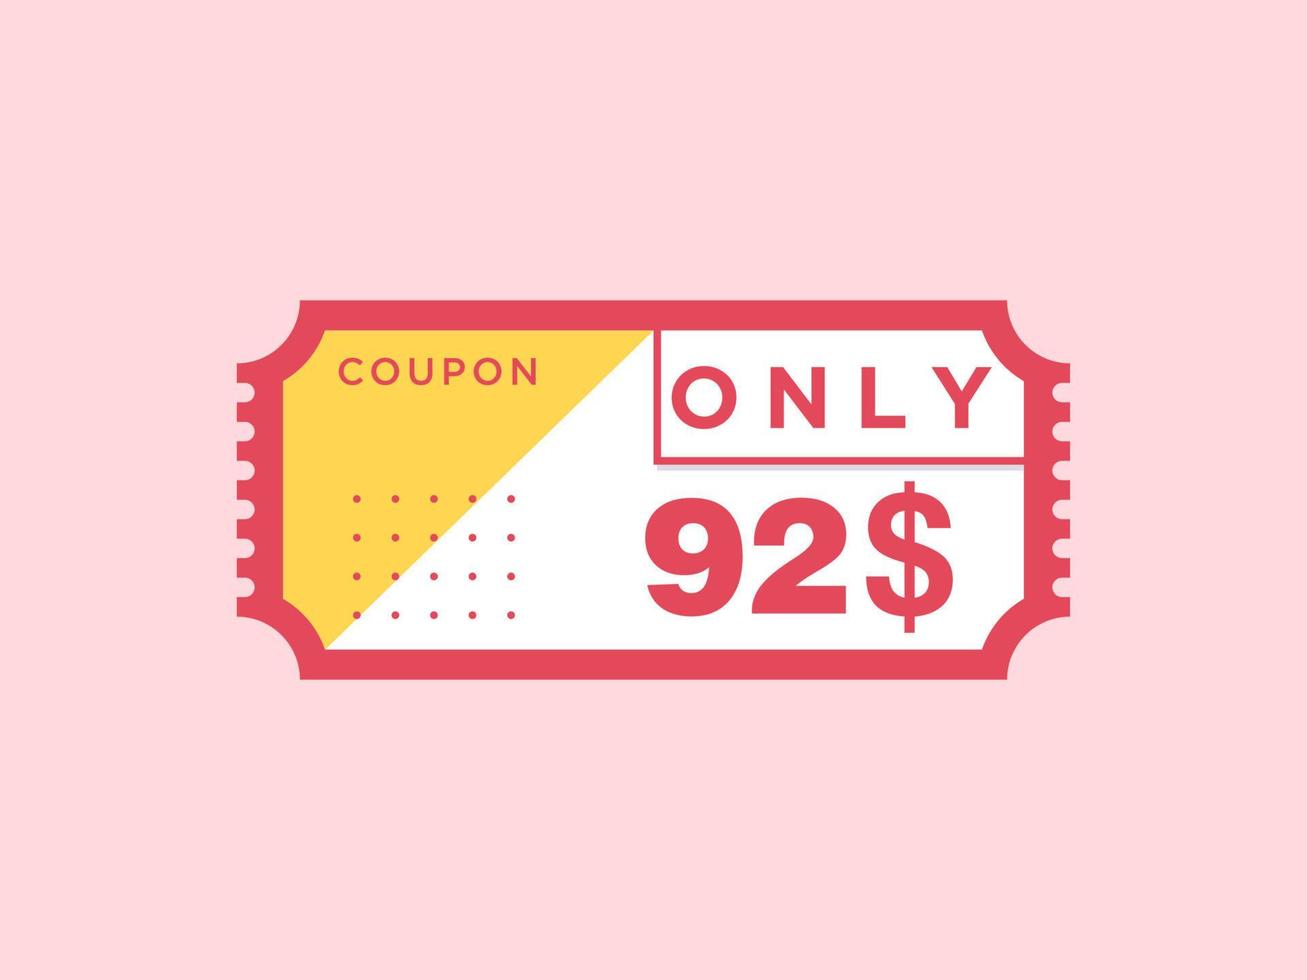 92 Dollar Only Coupon sign or Label or discount voucher Money Saving label, with coupon vector illustration summer offer ends weekend holiday